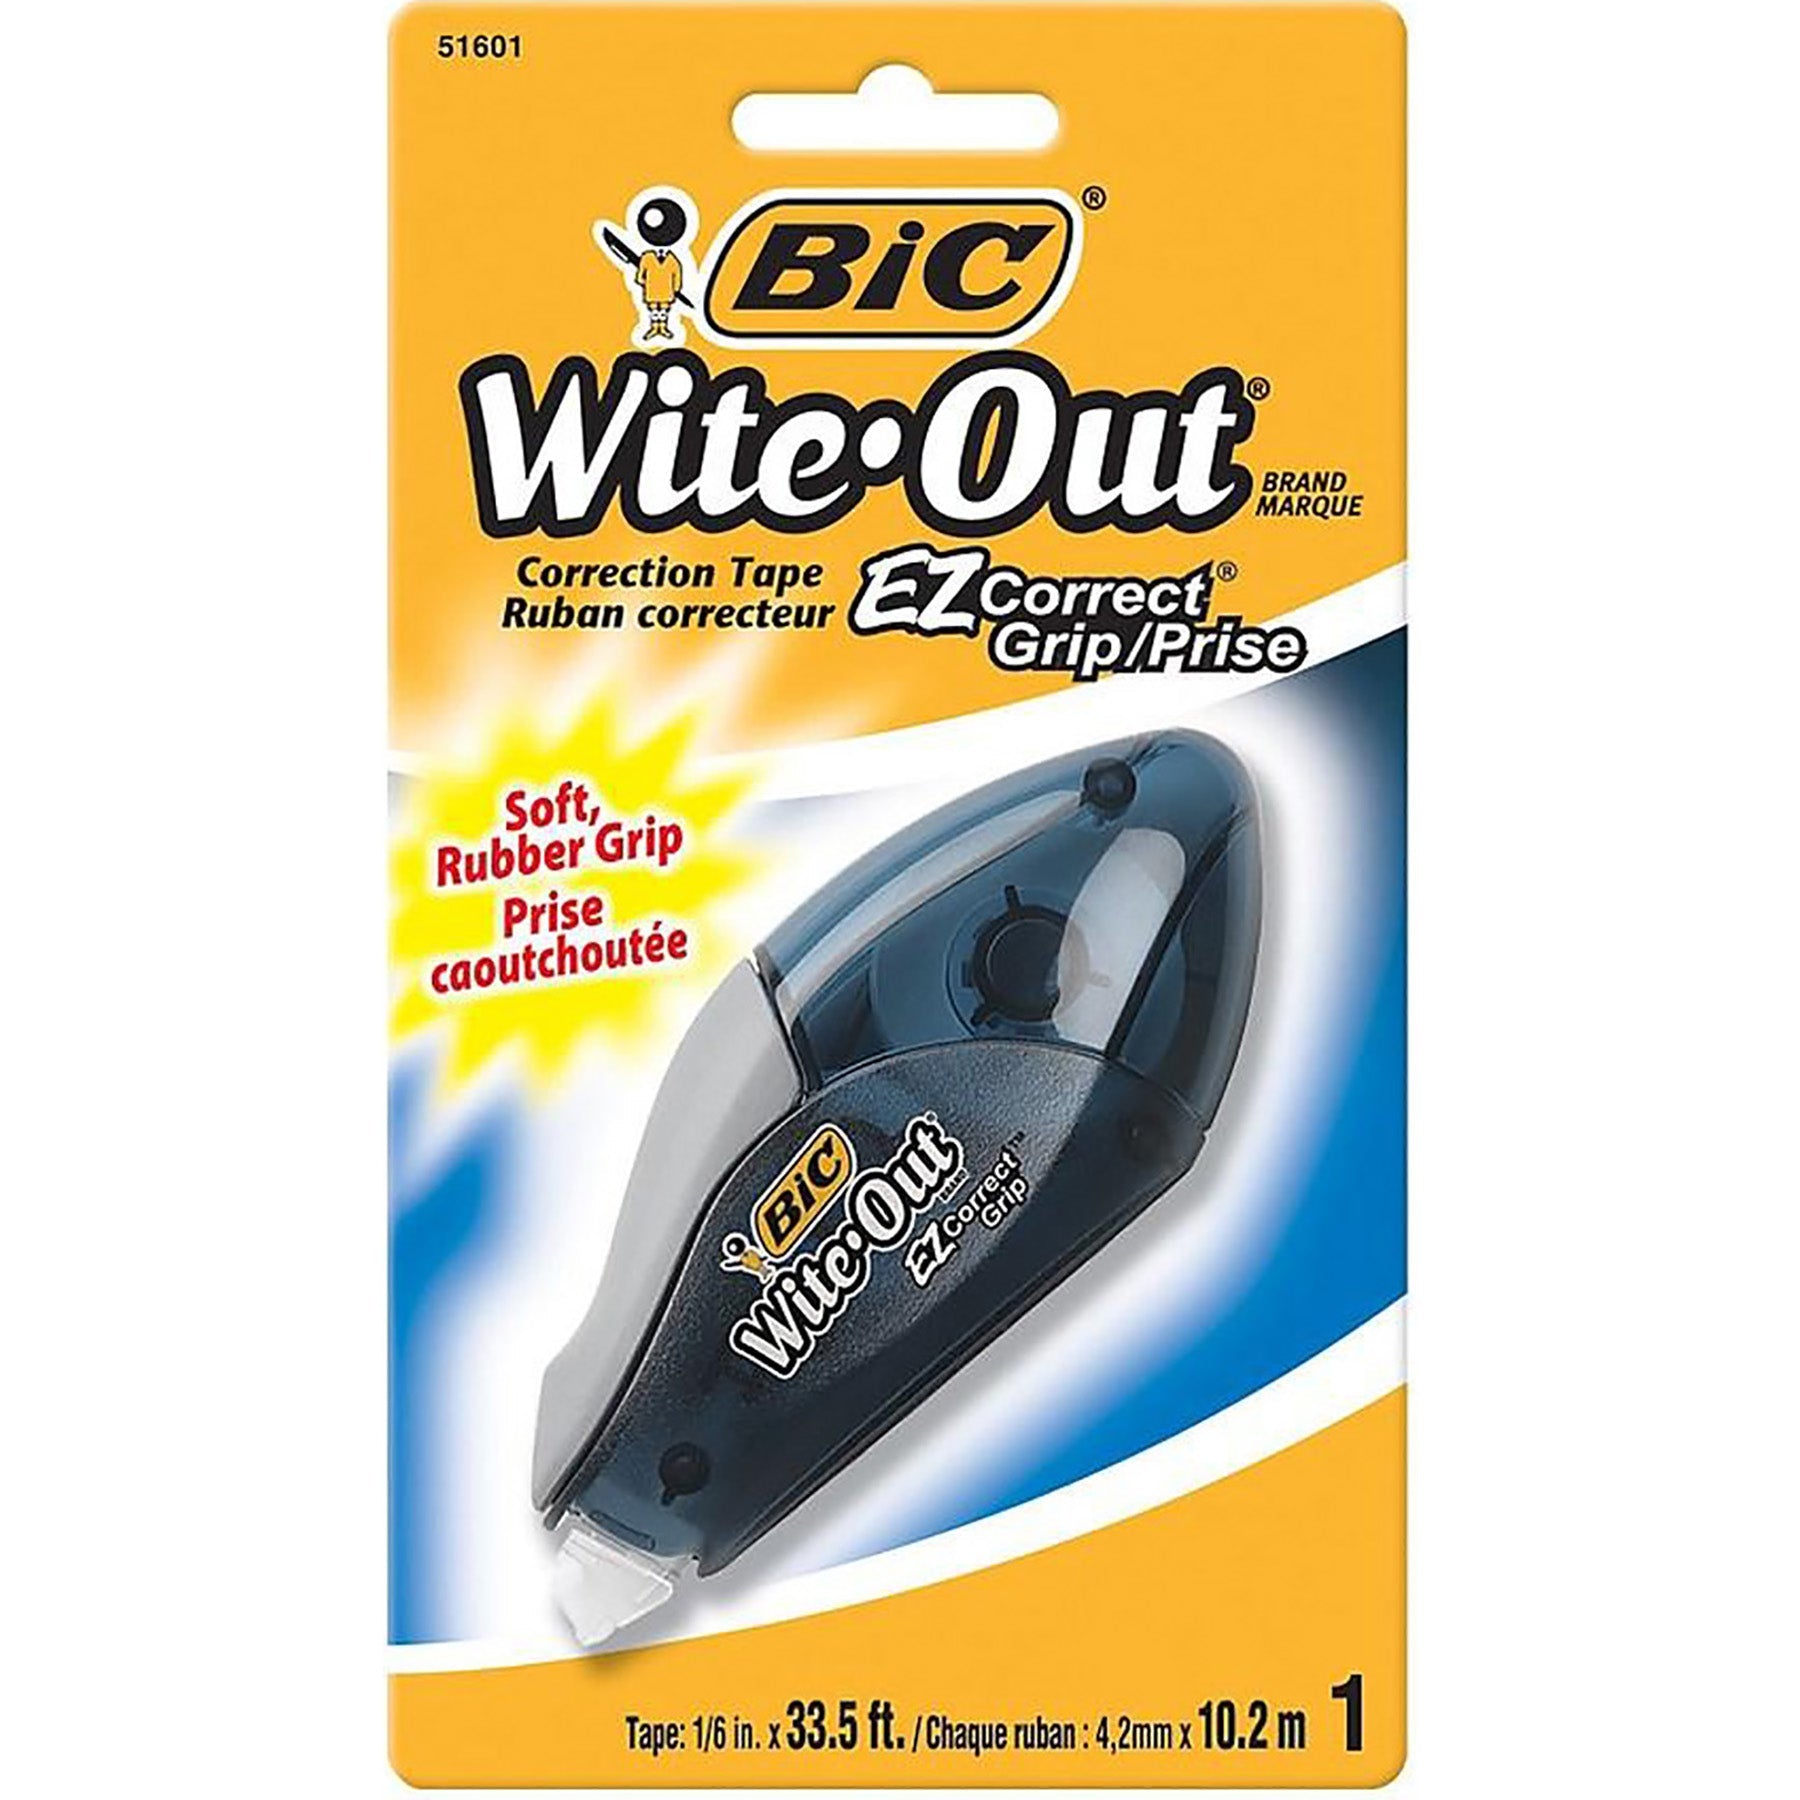 Bic Wite-out Correction Tape with Soft Grip 0.1in x 33.5ft